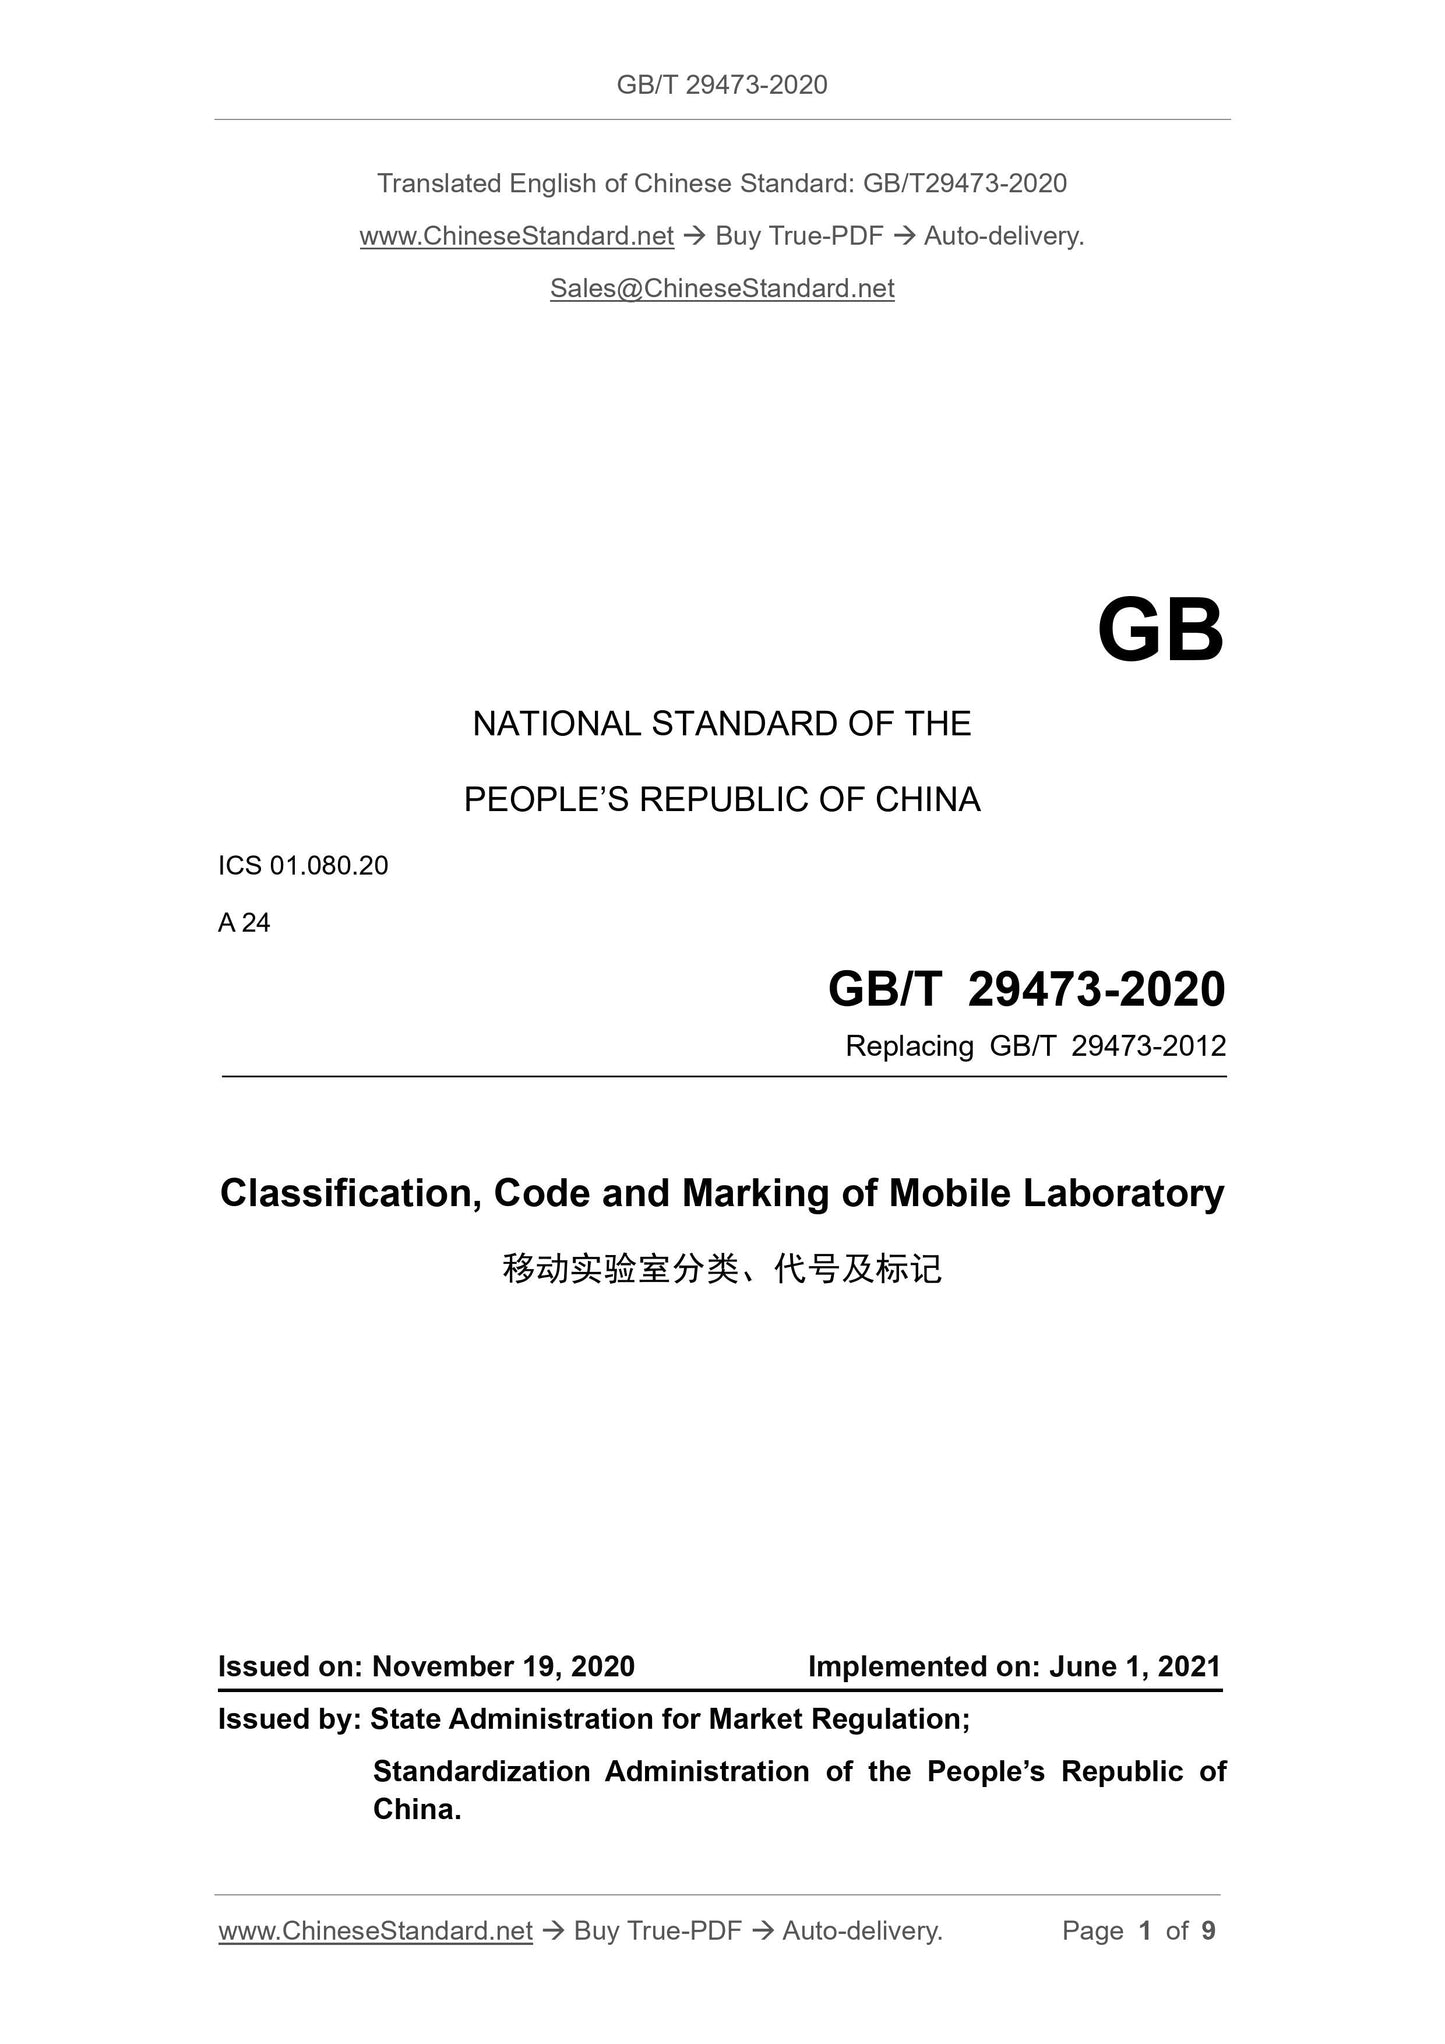 GB/T 29473-2020 Page 1